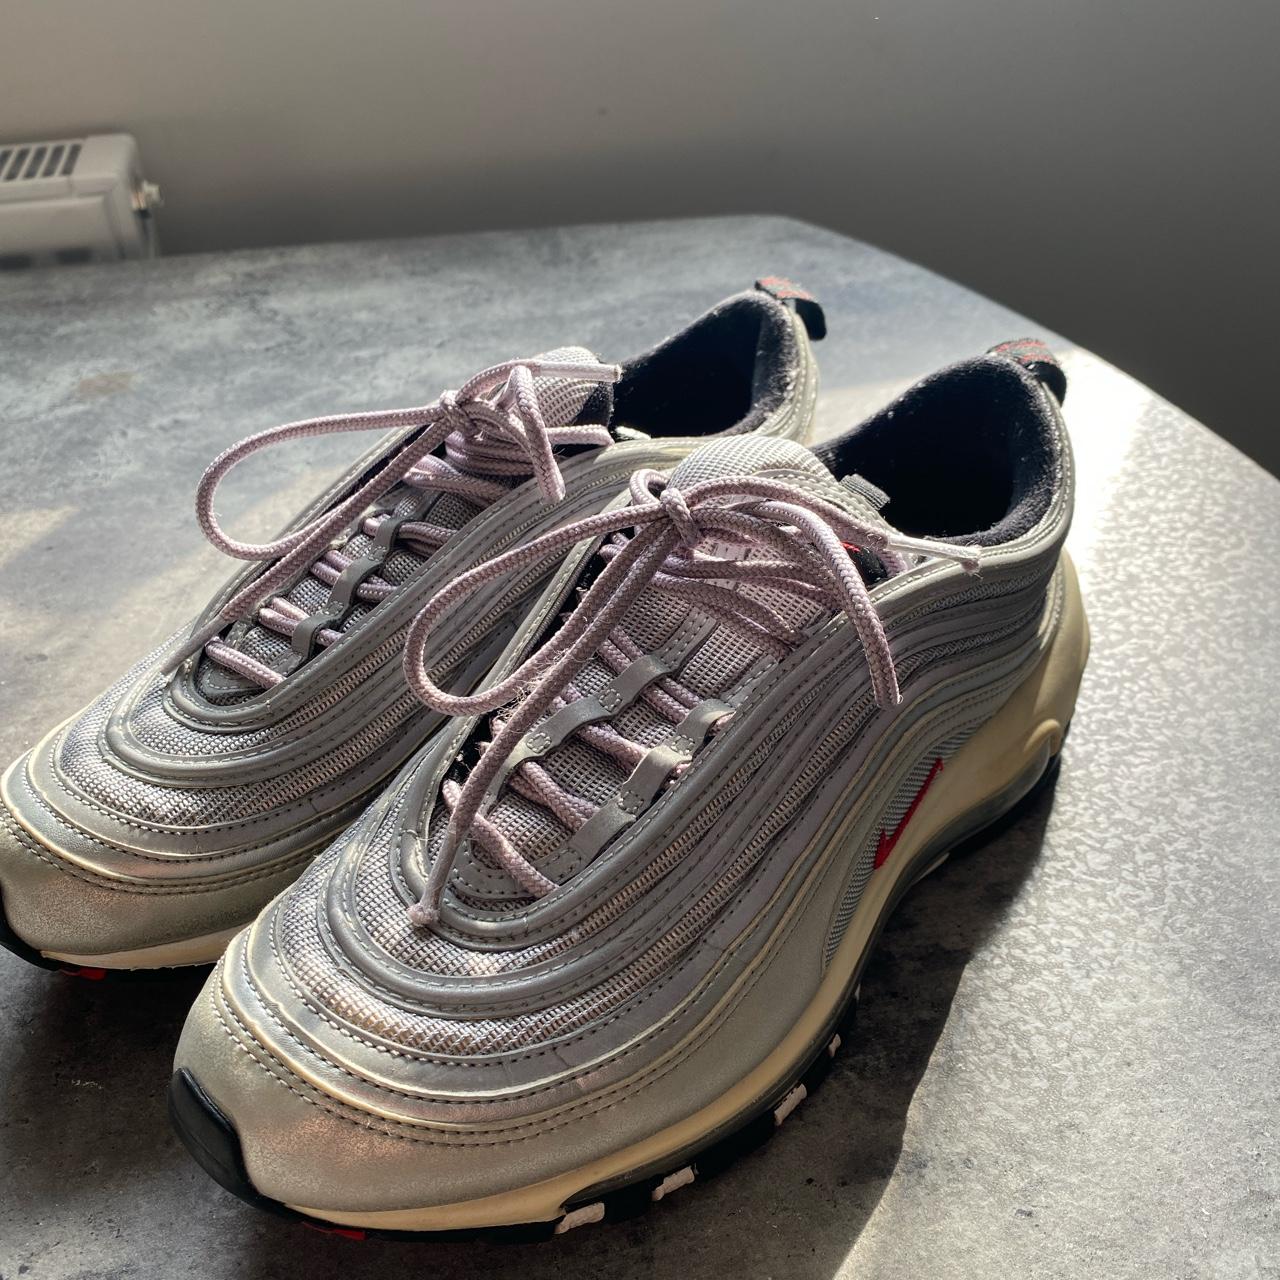 Nike airmax 97 reflective in silver Size 6... - Depop